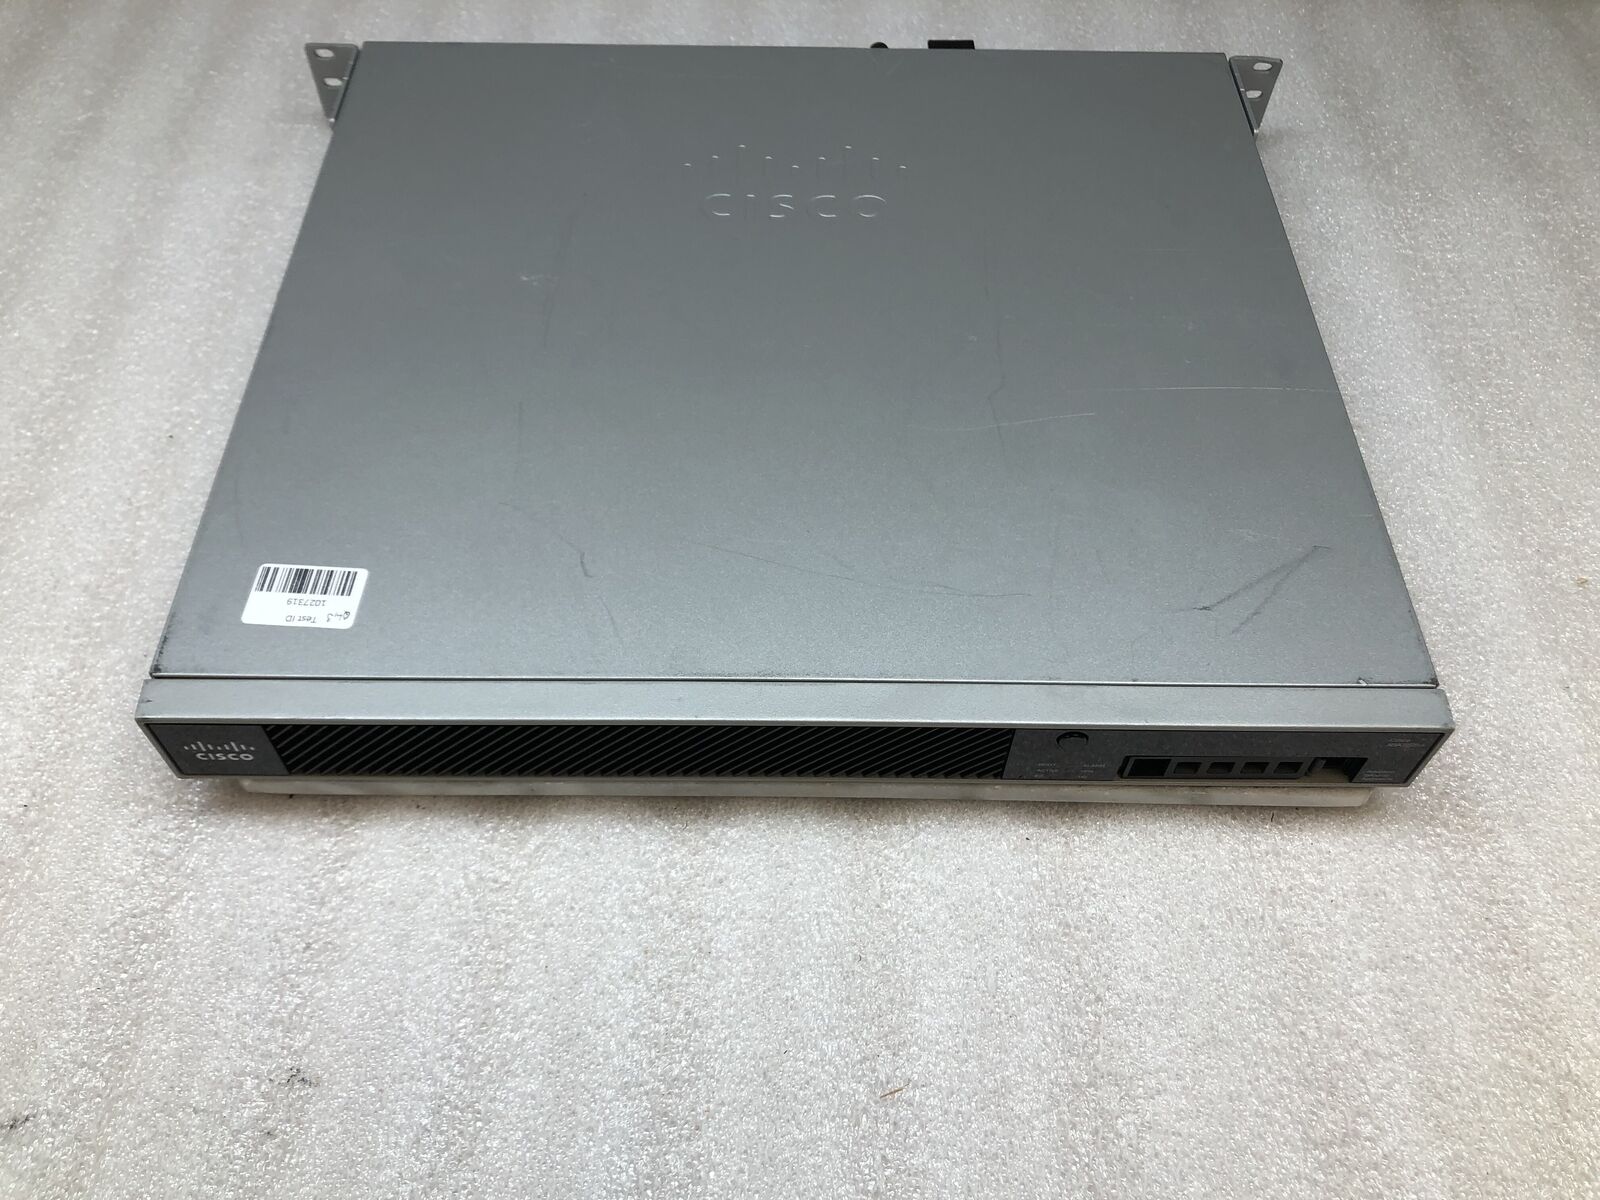 Cisco ASA 5525-X AnyConnect 8-Port Adaptive Security Firewall Appliance